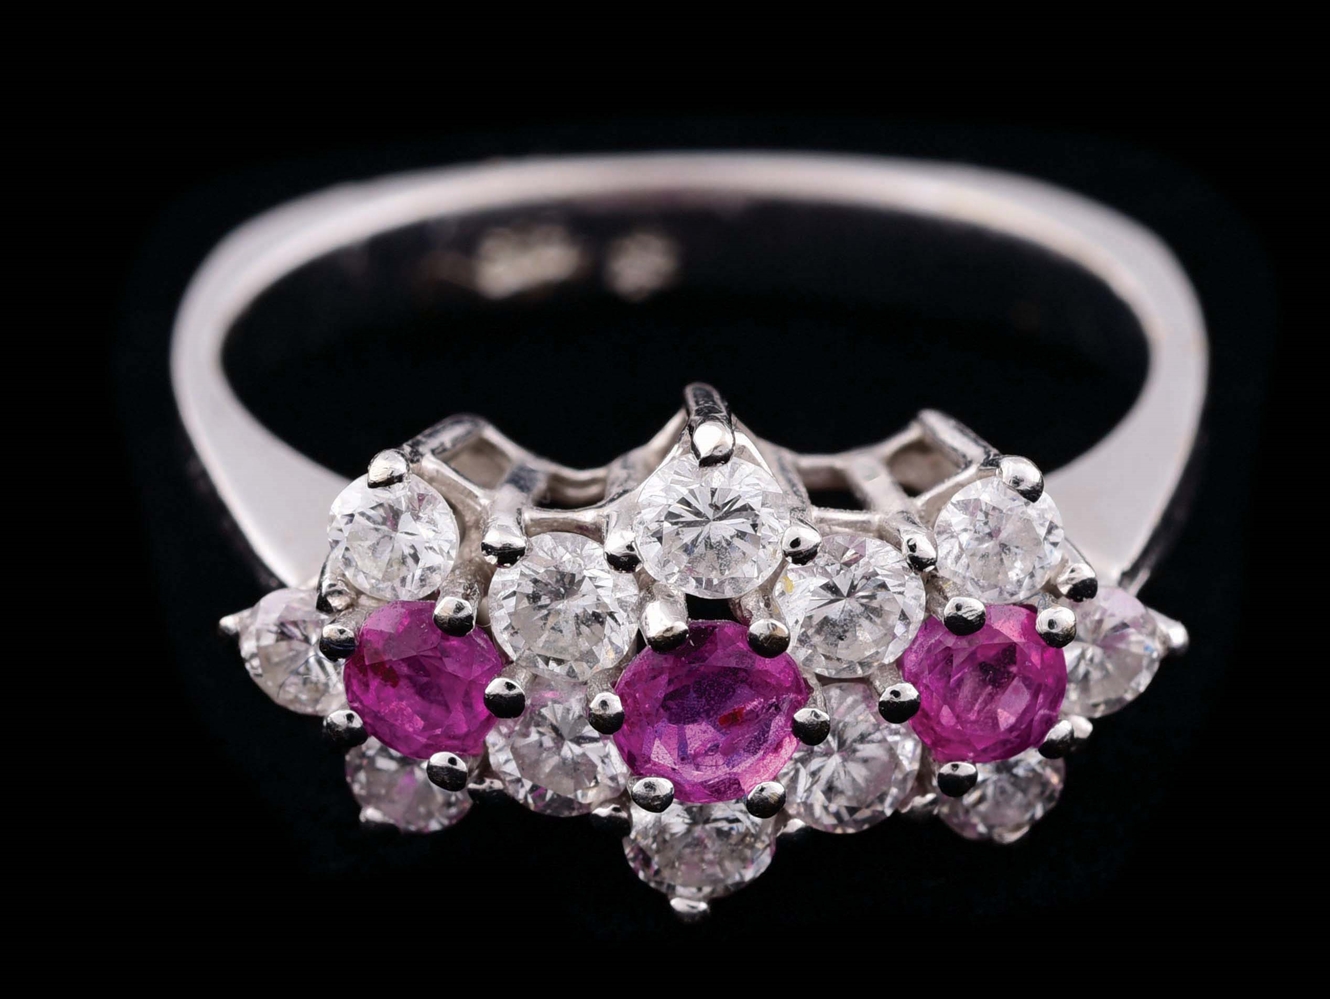 14K WHITE GOLD PINK SAPPHIRE AND DIAMOND RING.